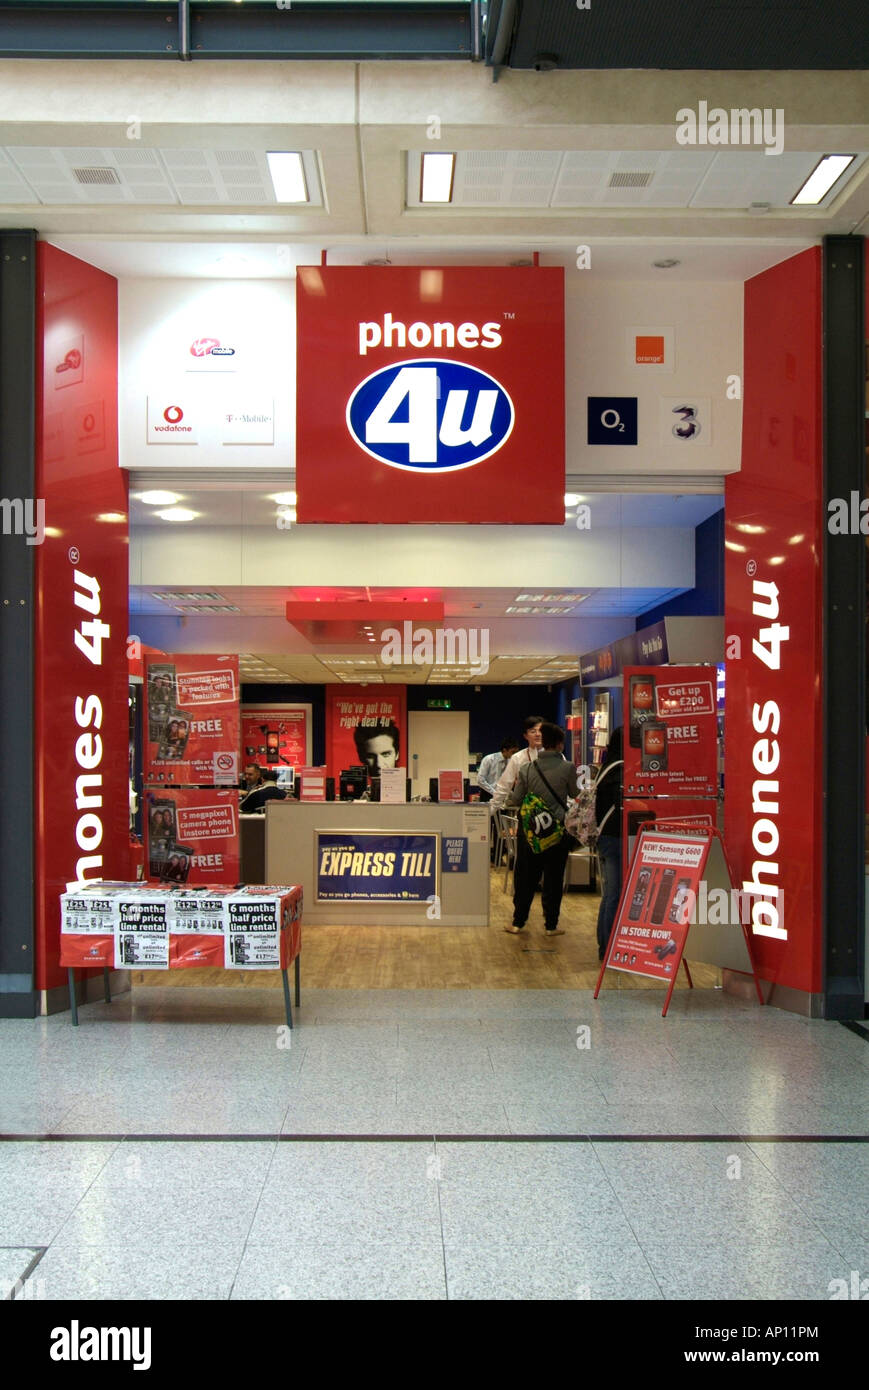 phones 4u mobile telephony sale trafford centre Manchester display mall inside enclosed entrance portal indoor interior square o Stock Photo